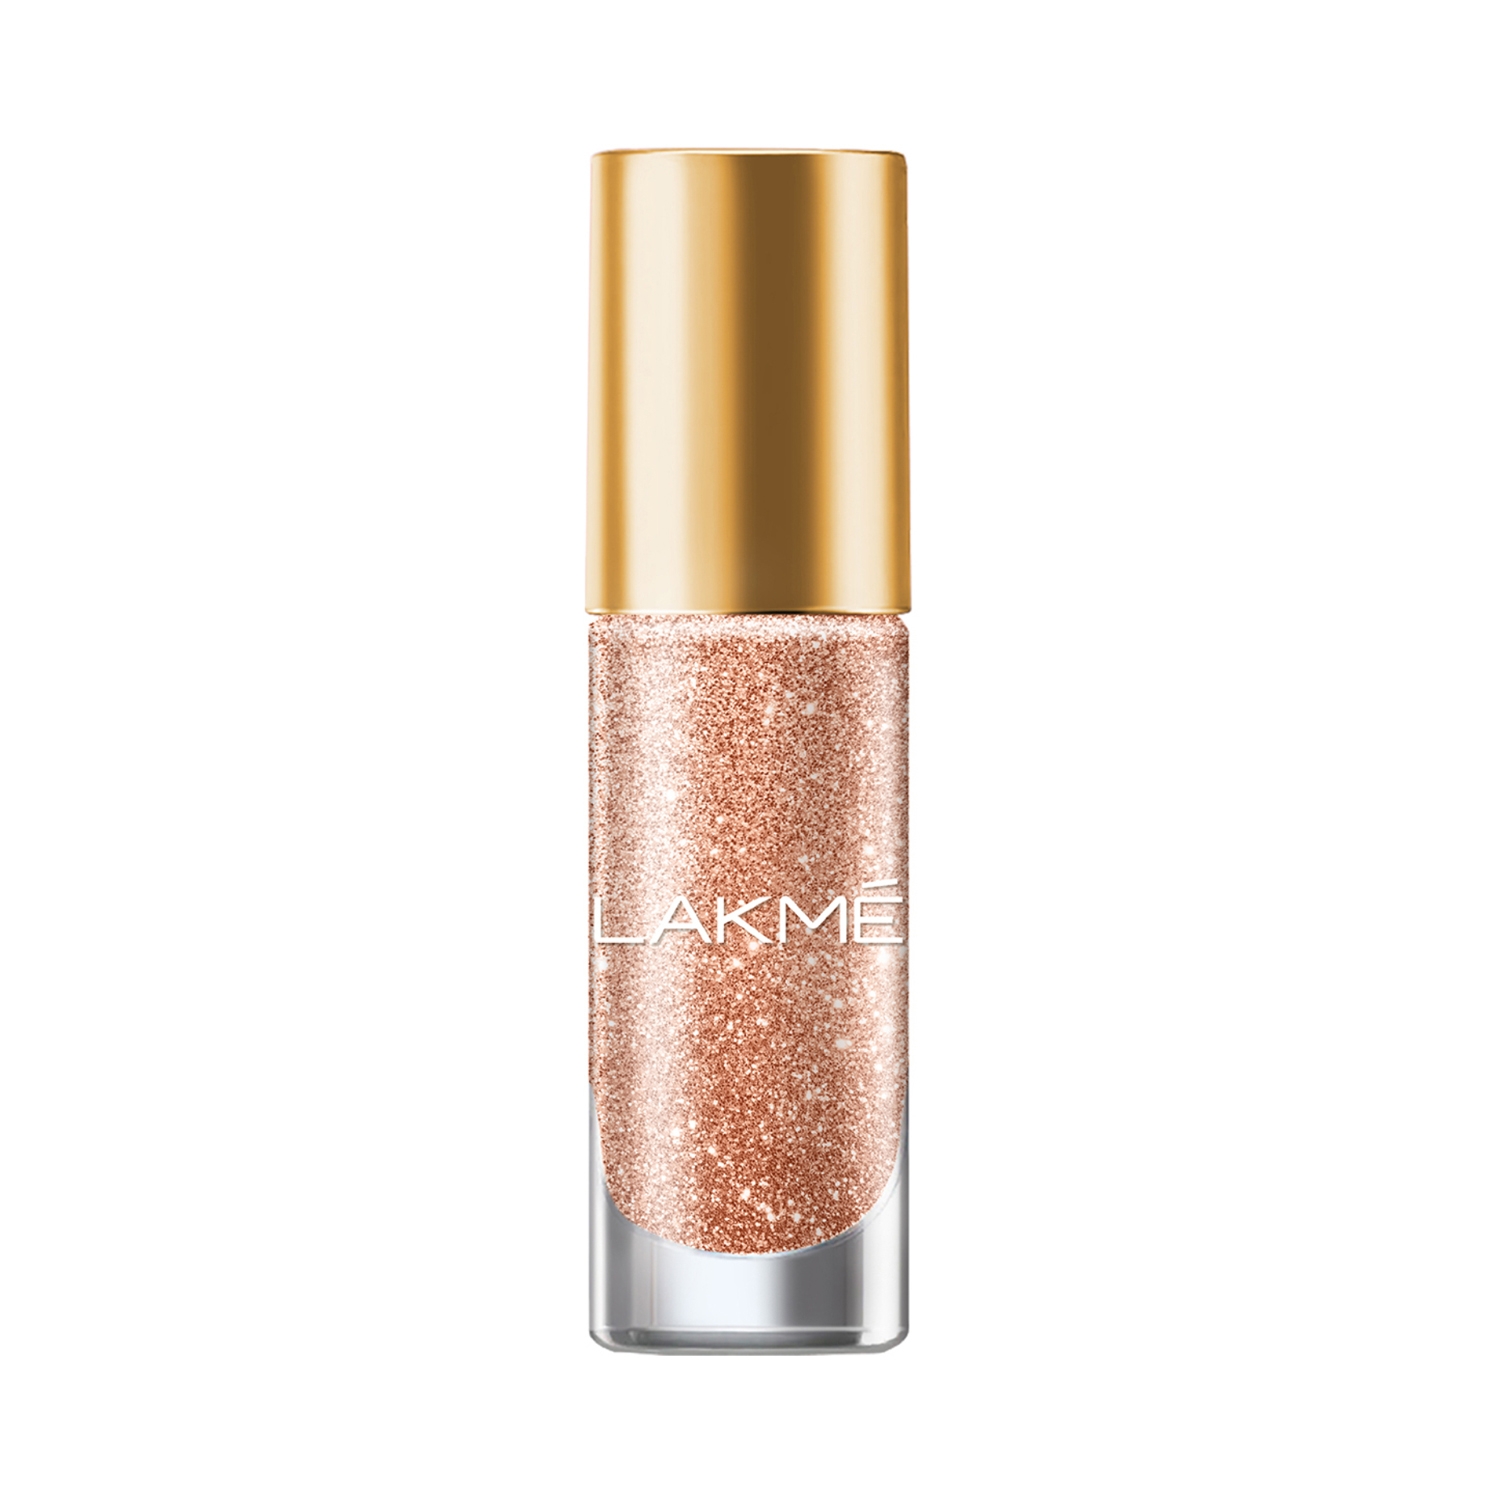 Lakmé True Wear Nail Color Shade 507 - Price in India, Buy Lakmé True Wear  Nail Color Shade 507 Online In India, Reviews, Ratings & Features |  Flipkart.com